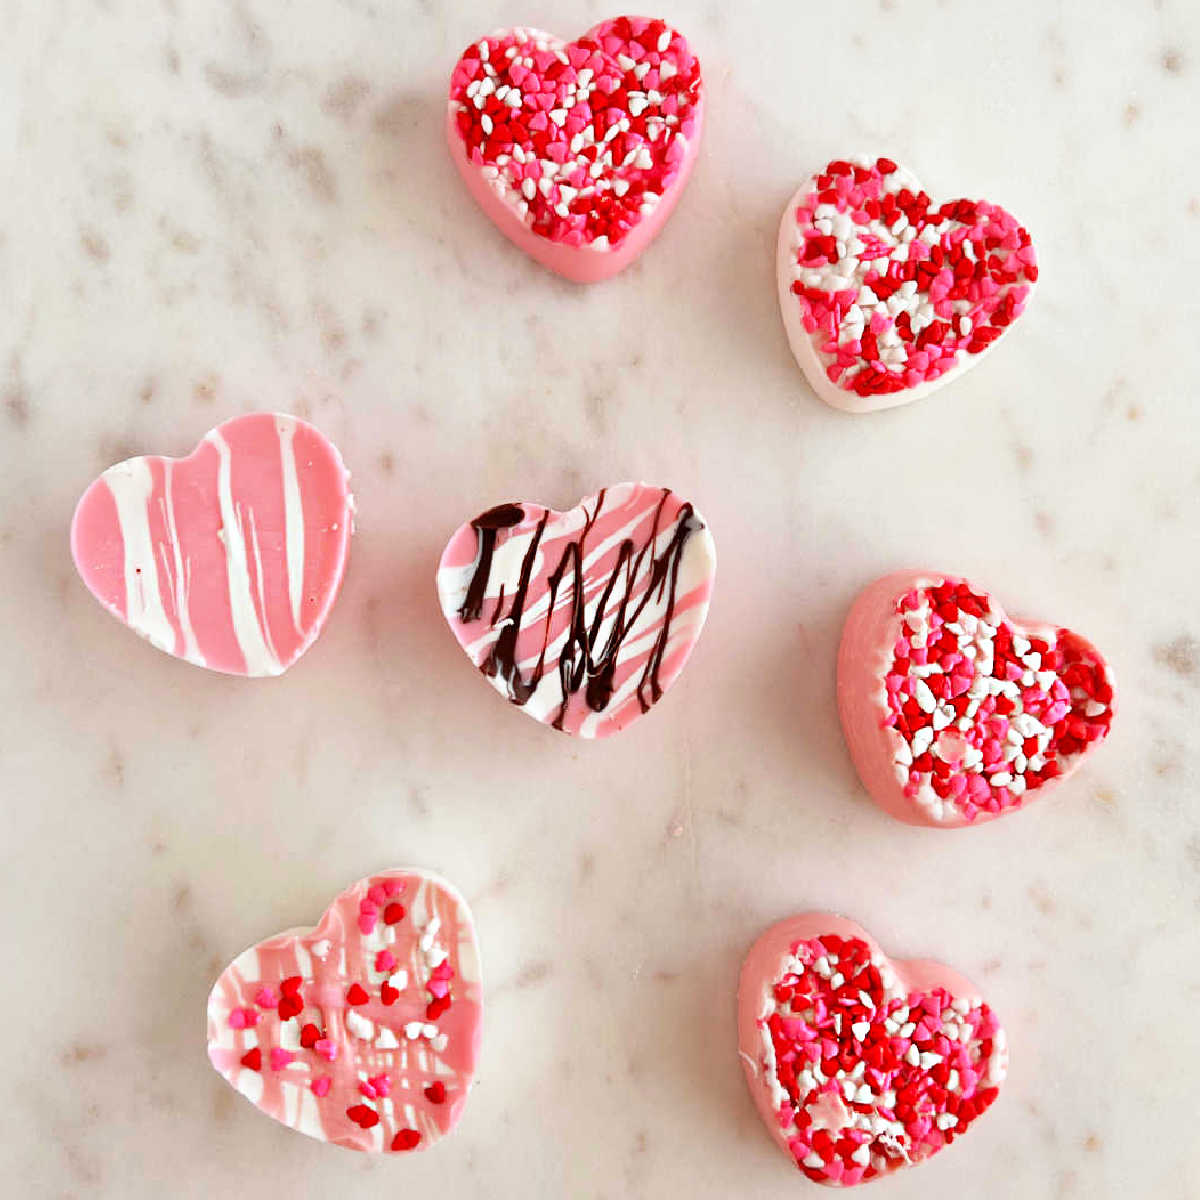 Homemade Chocolate Candy Hearts - Meatloaf and Melodrama